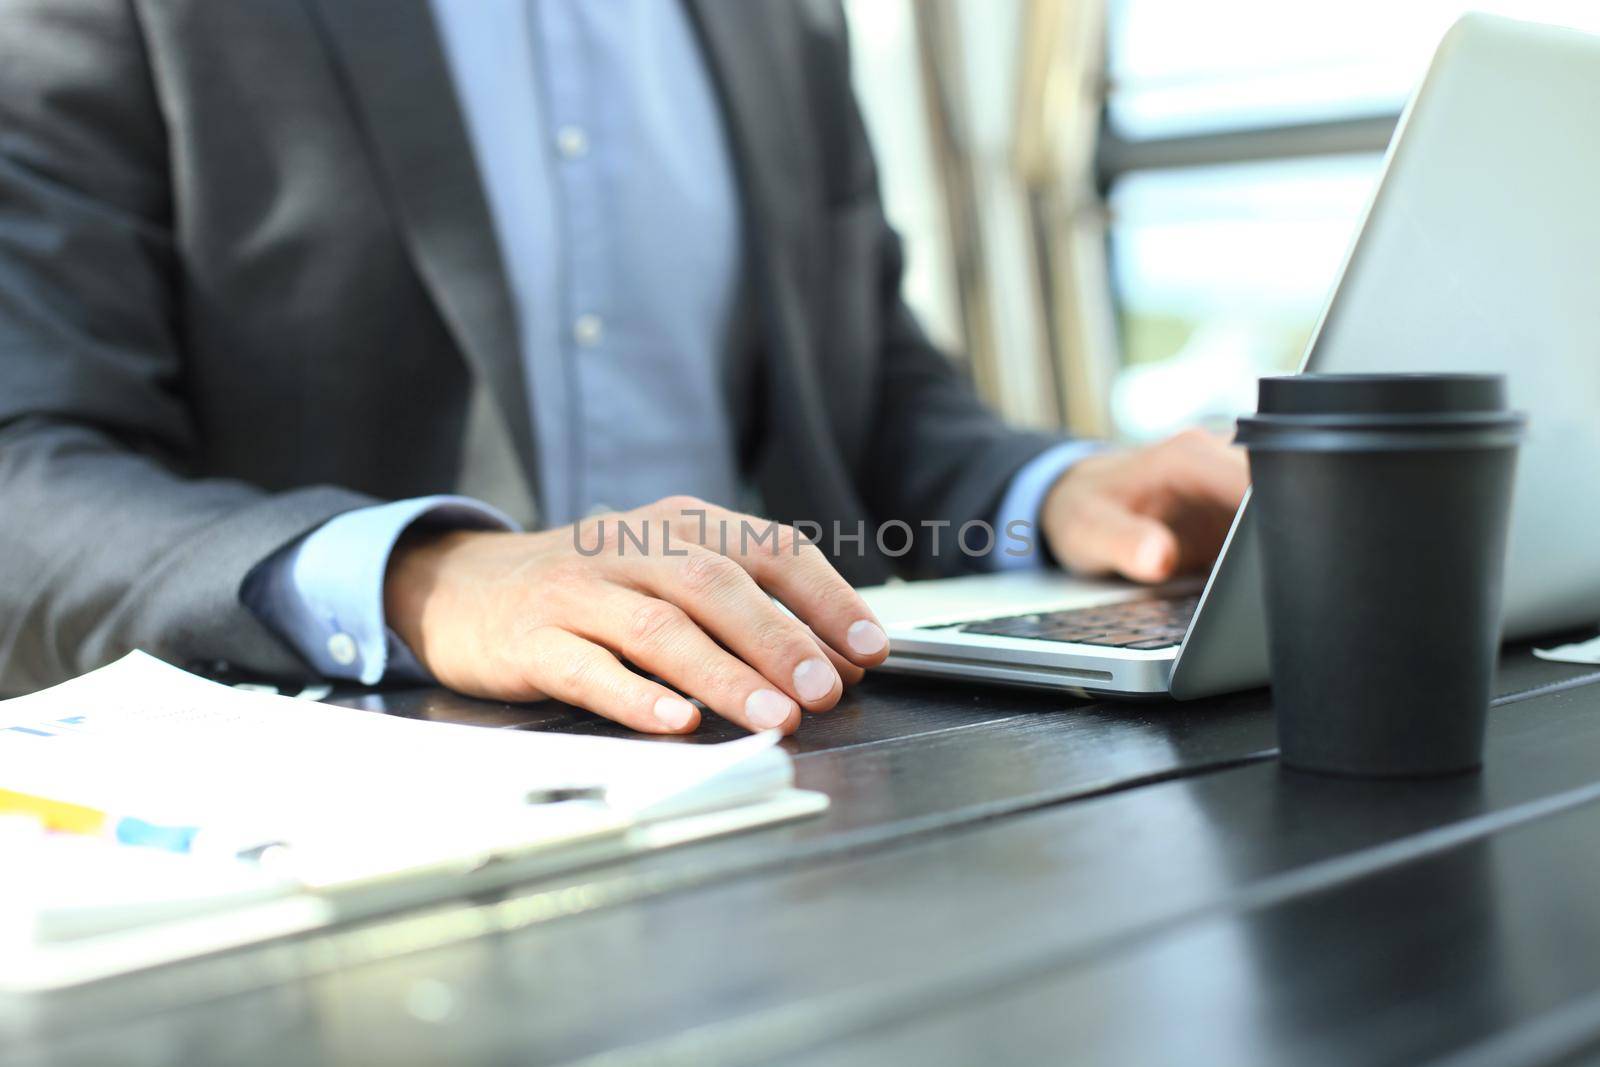 Business person analyzing financial statistics displayed on the laptop screen.